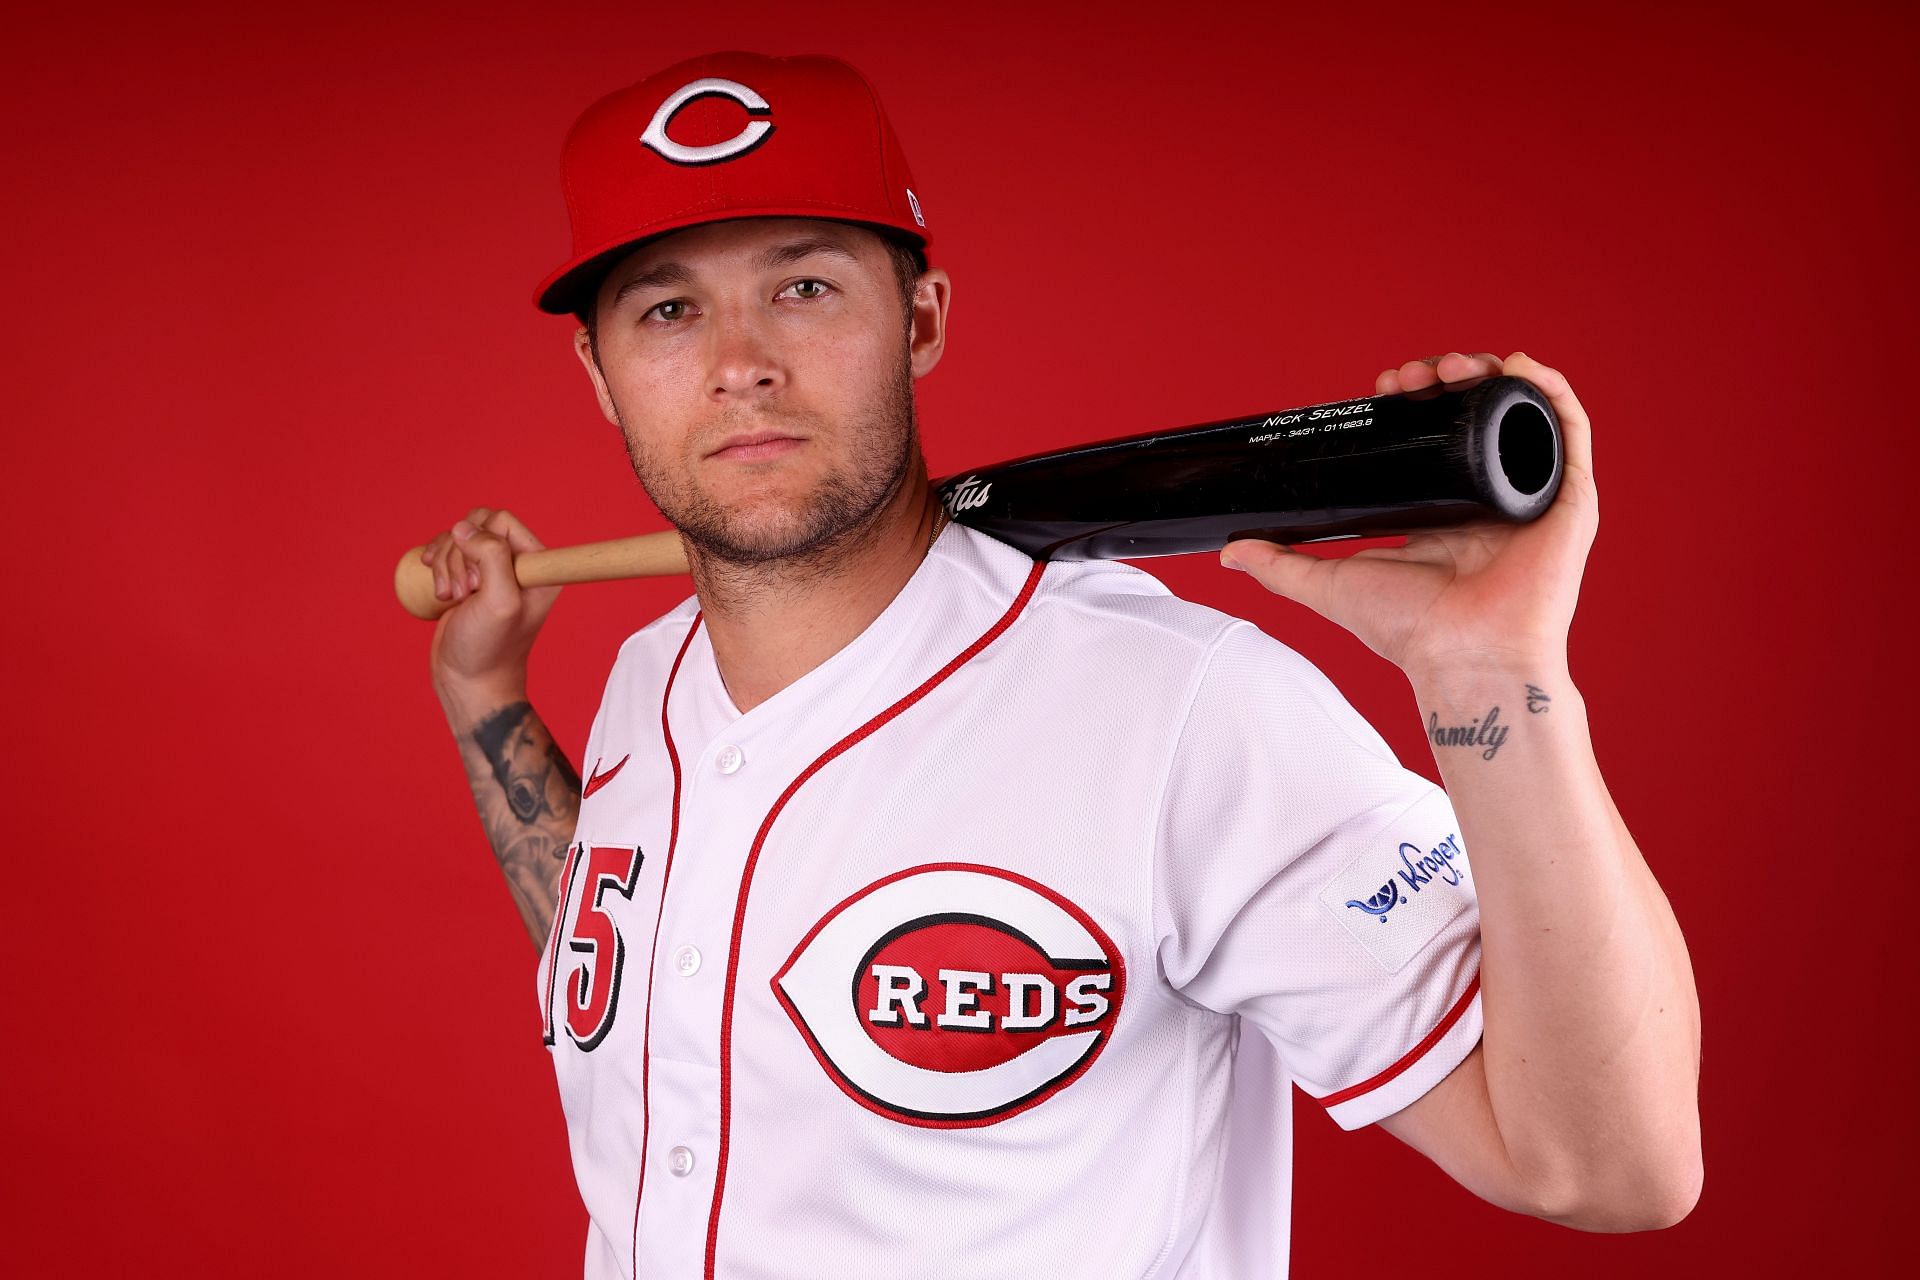 Cincinnati Reds fans displeased by becoming the next team to add